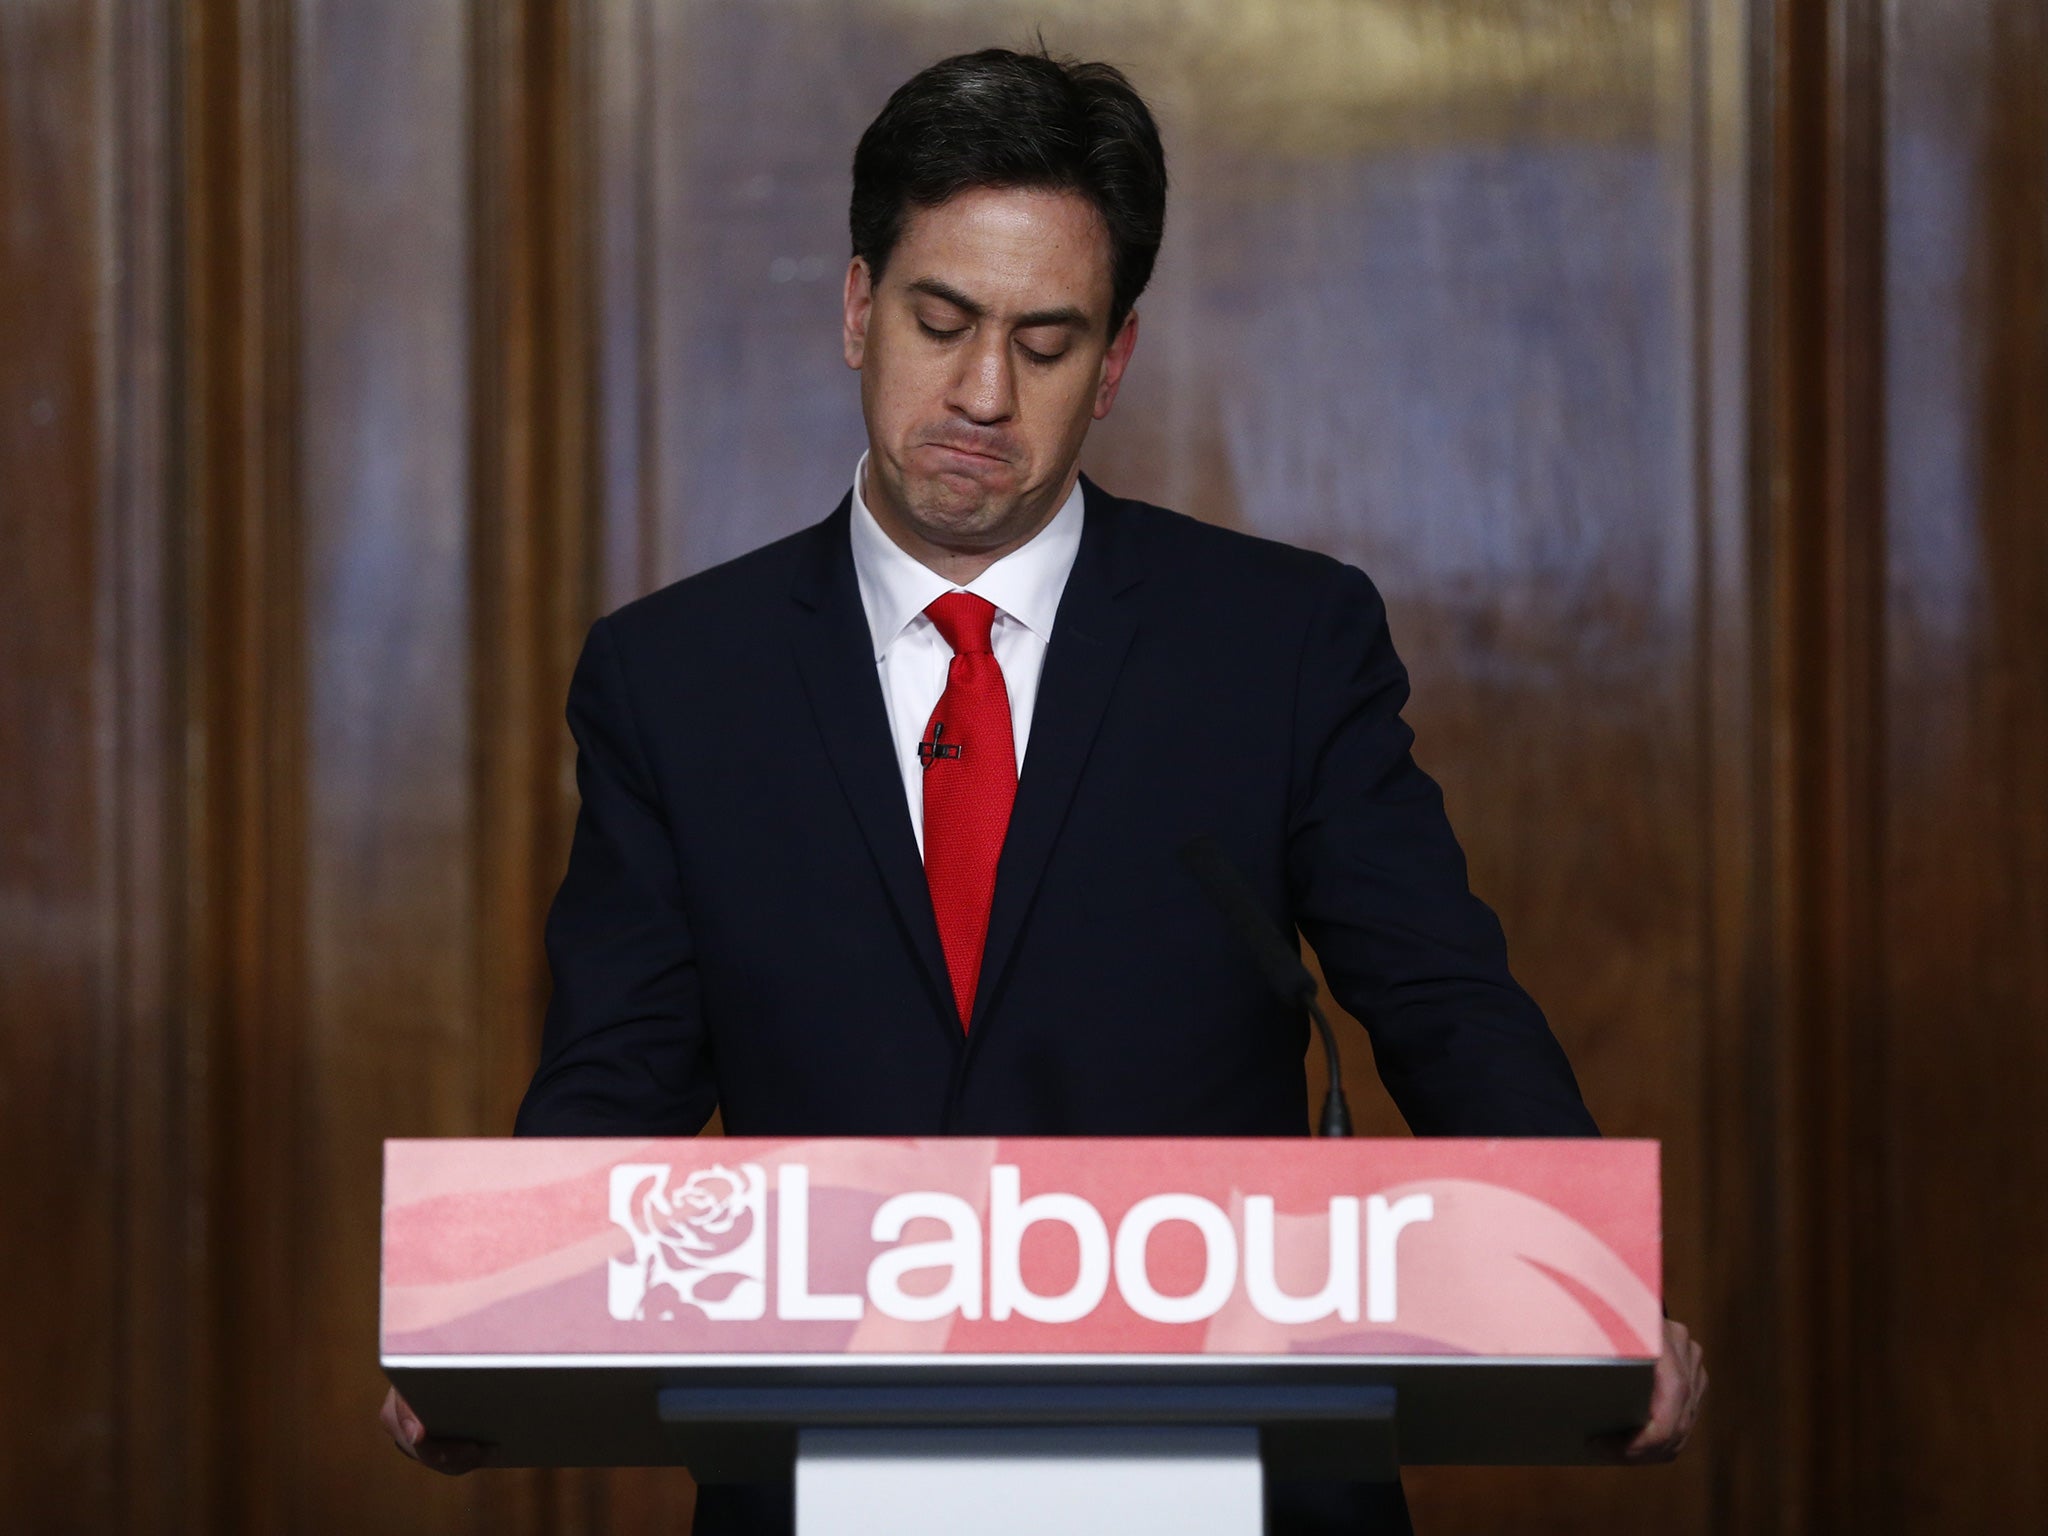 Ed Miliband delivers his resignation speech having decided to step down immediately